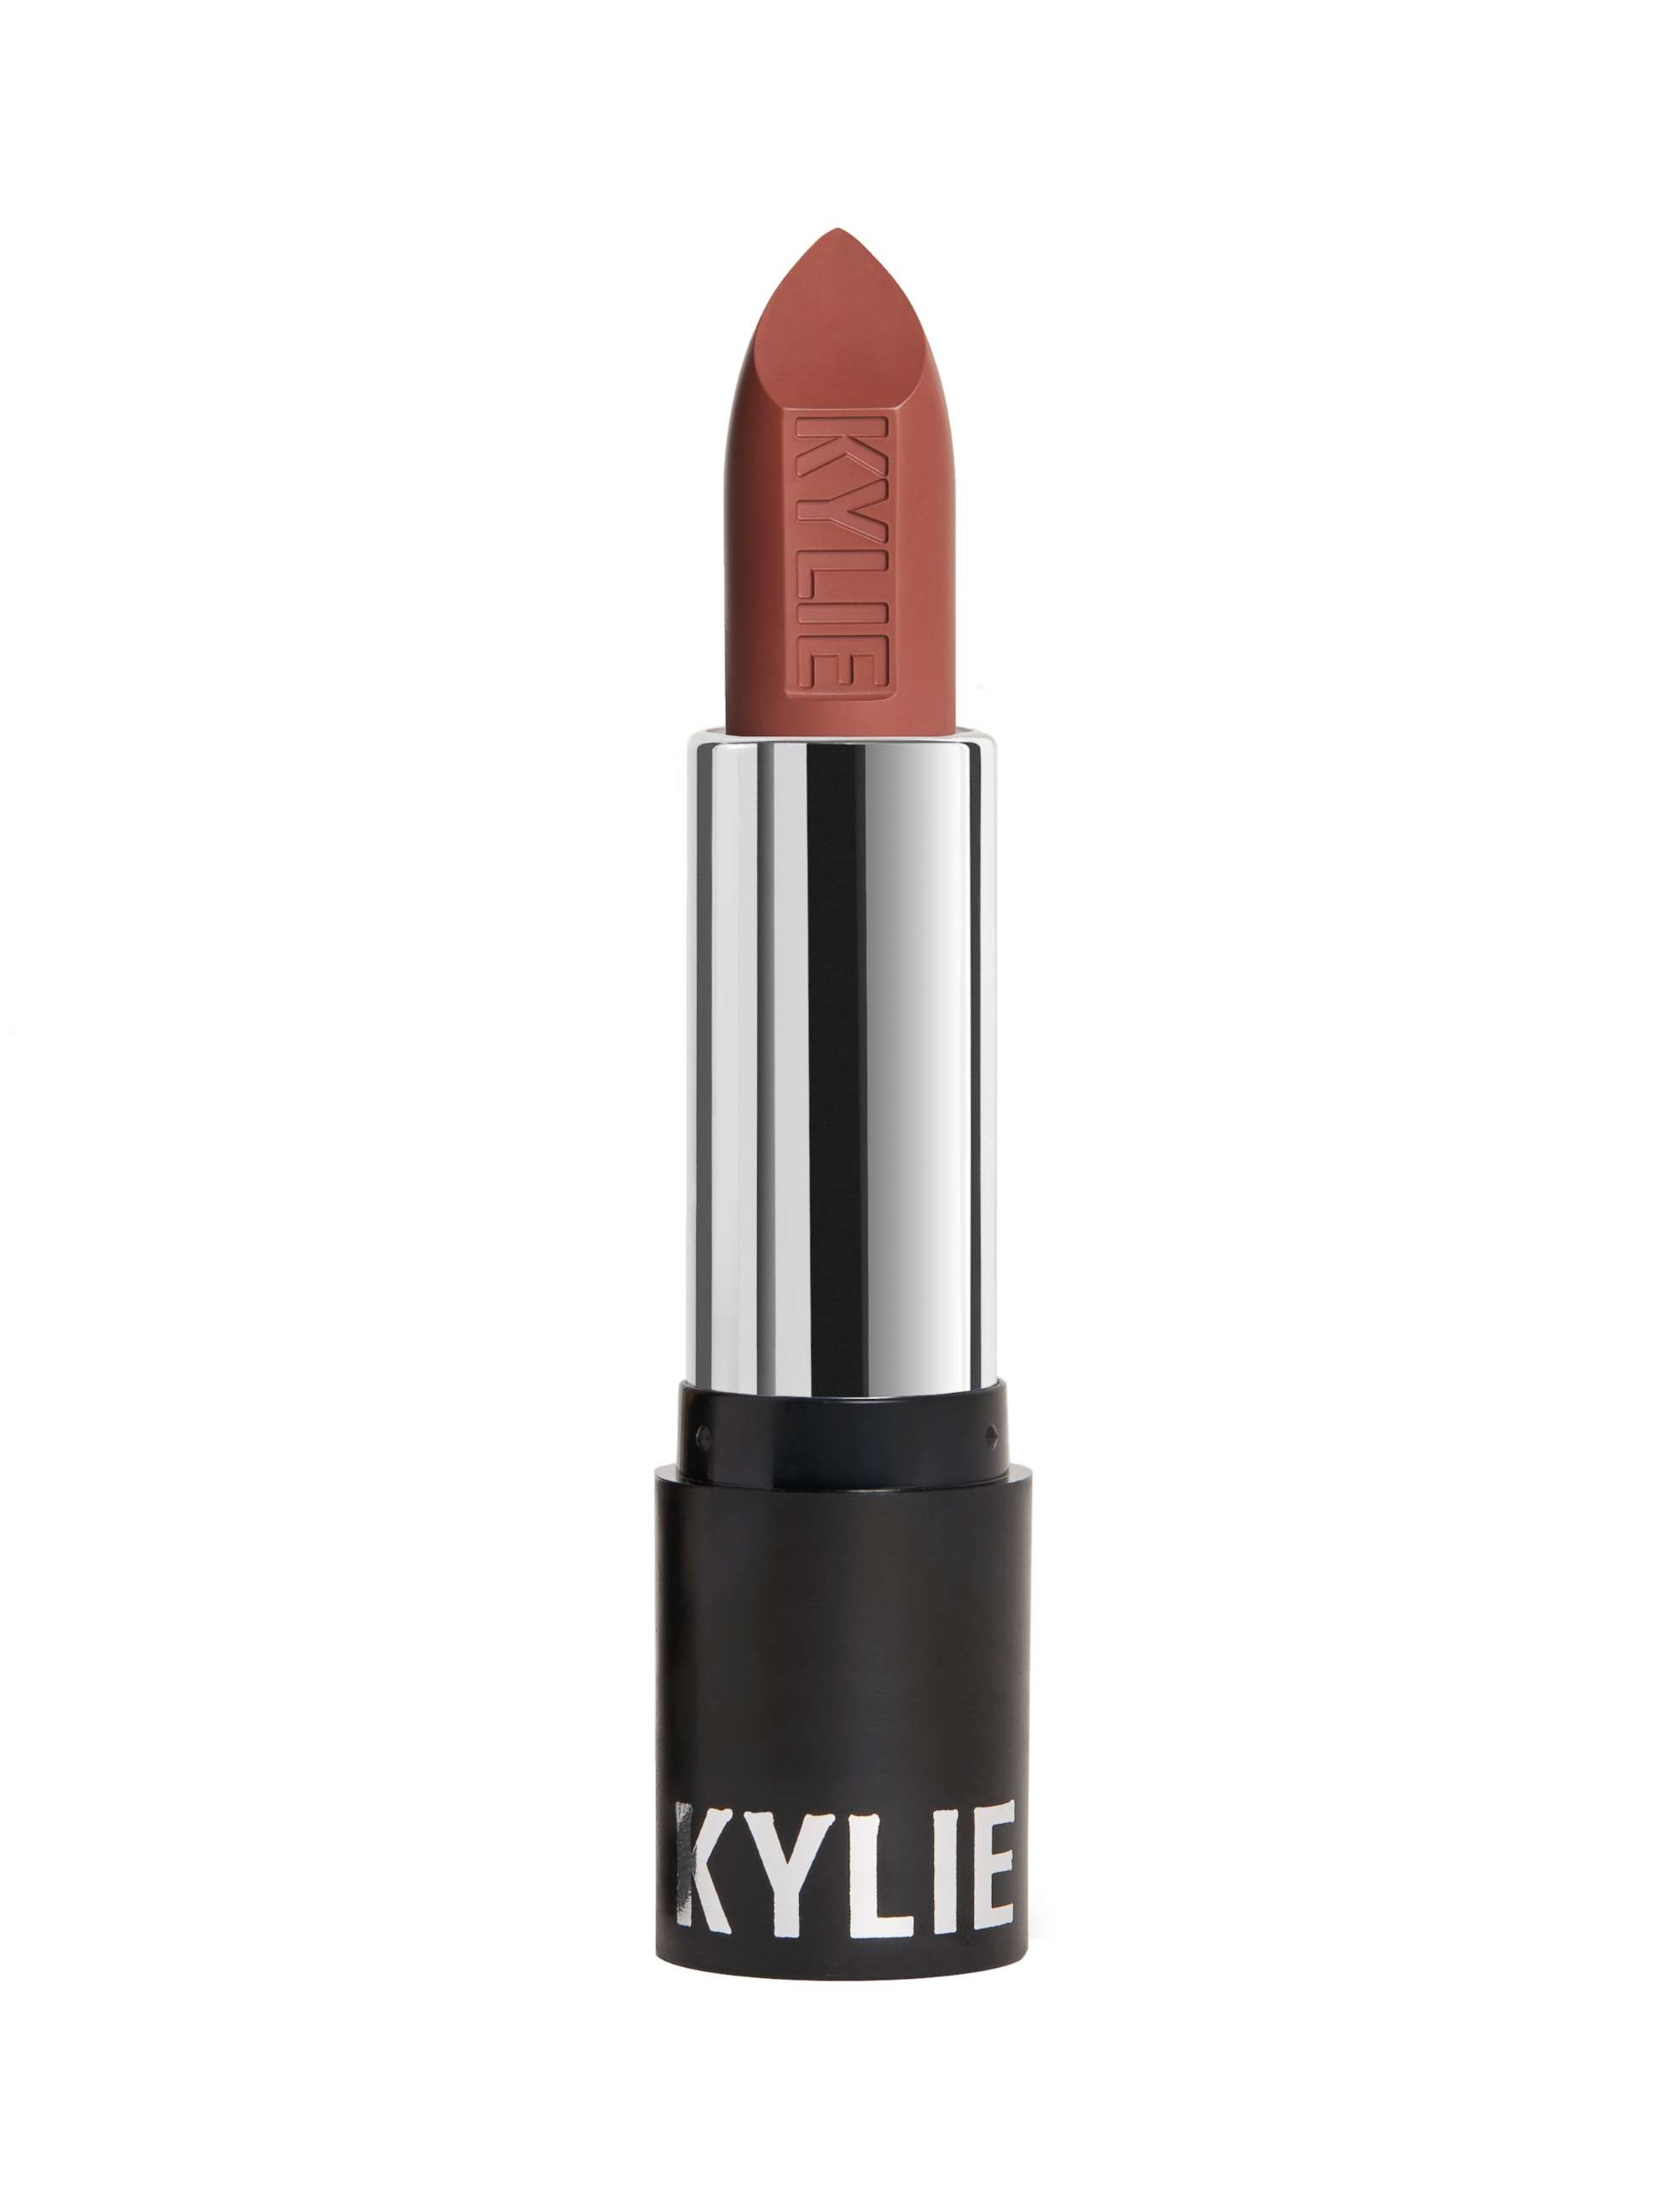 PHOTO: Kylie Cosmetics Matte Lipstick in Yes Baby, $17, kyliecosmetics.com